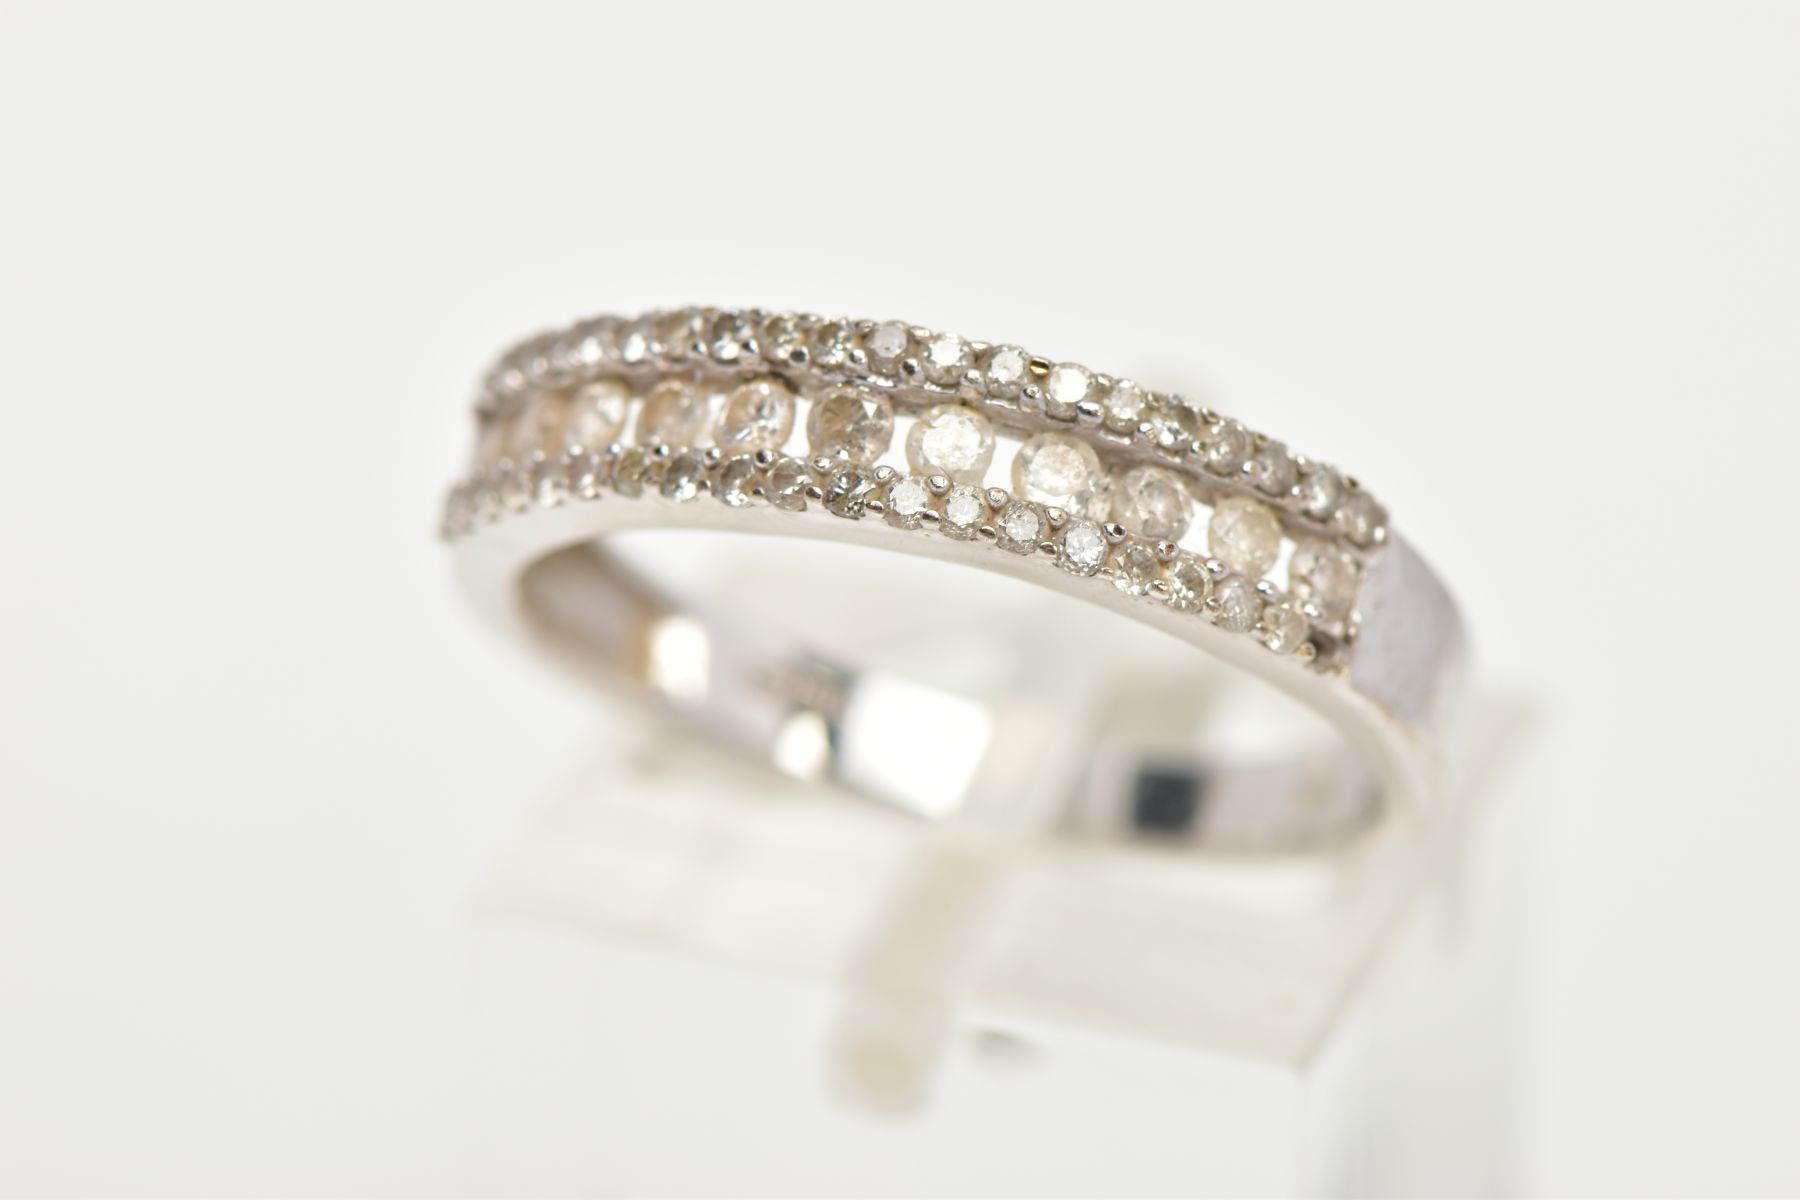 A 9CT WHITE GOLD DIAMOND HALF ETERNITY RING, designed with a central row of round brilliant cut